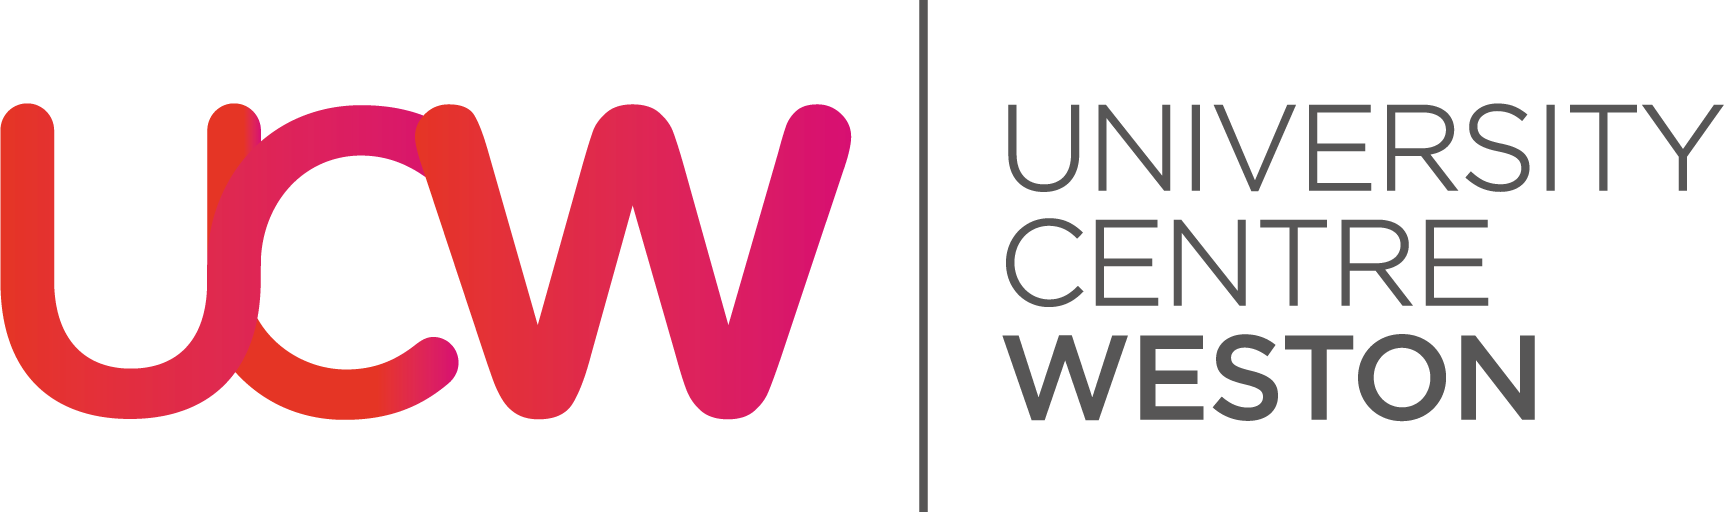 University Centre Weston logo for top university centre somerset degree near you with best higher education courses in weston-super-mare near bristol and bridgwater